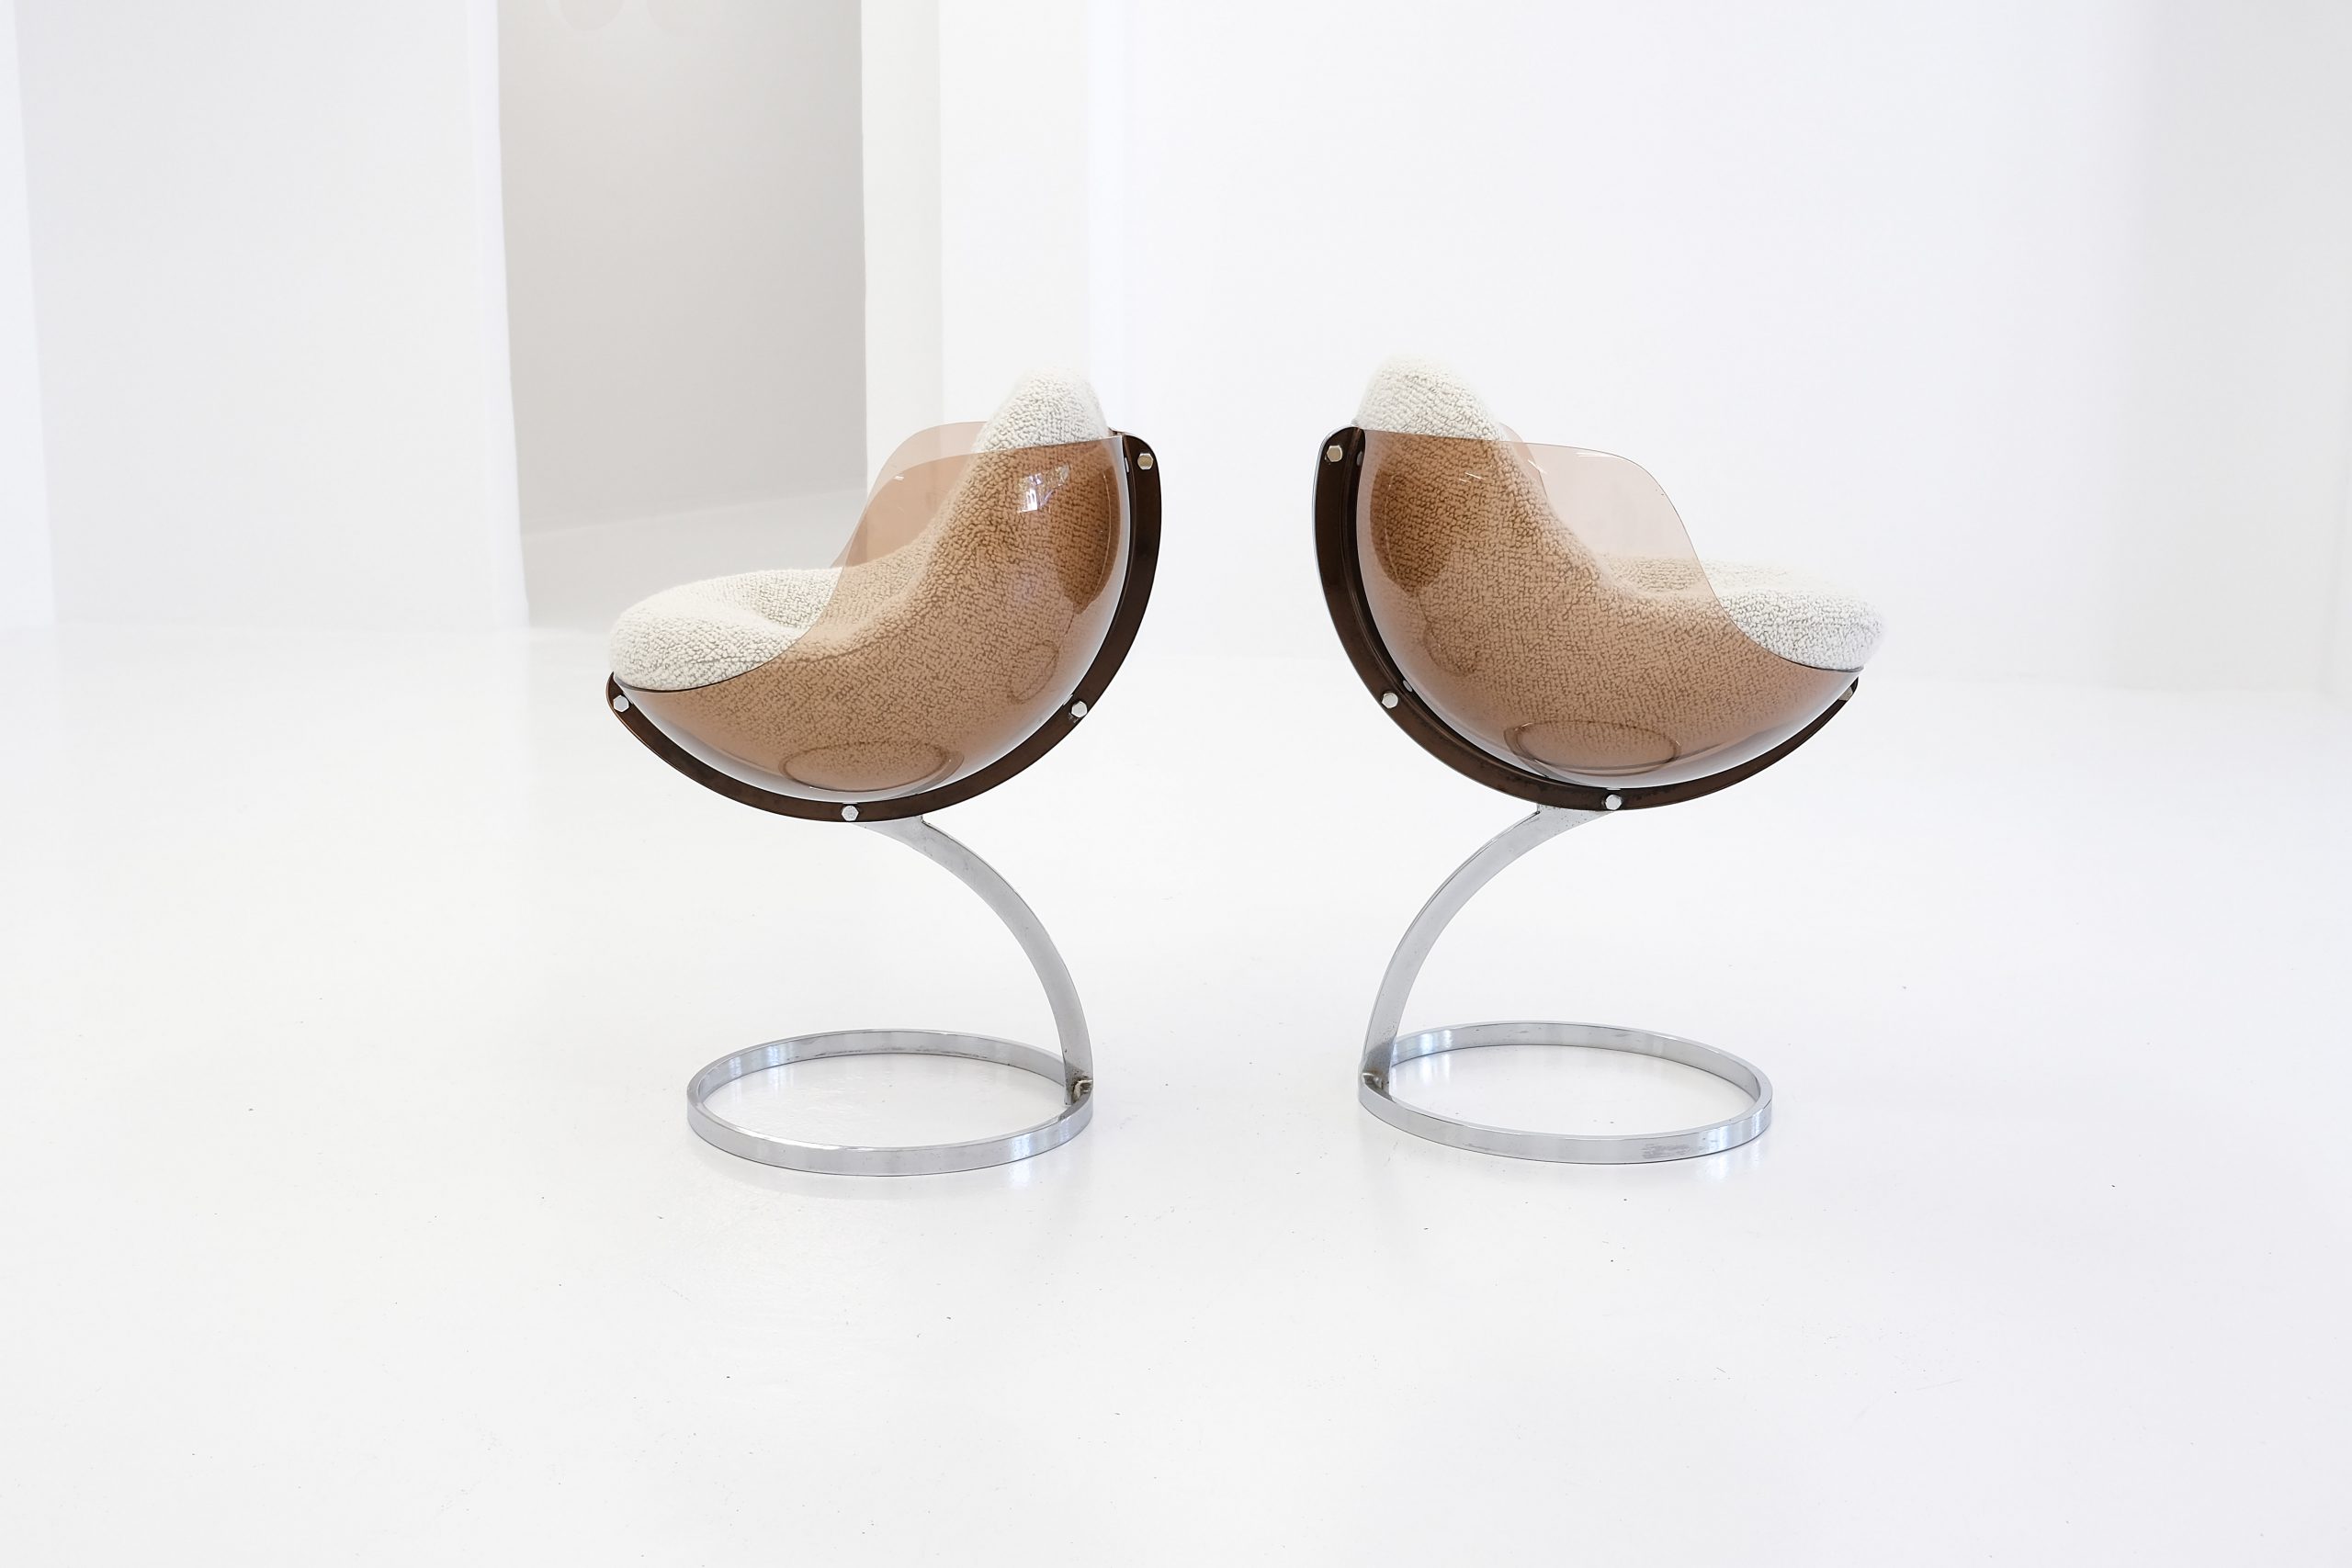 m. m. m. mobillier modulaire modern boris tabacoff sphere chair french design